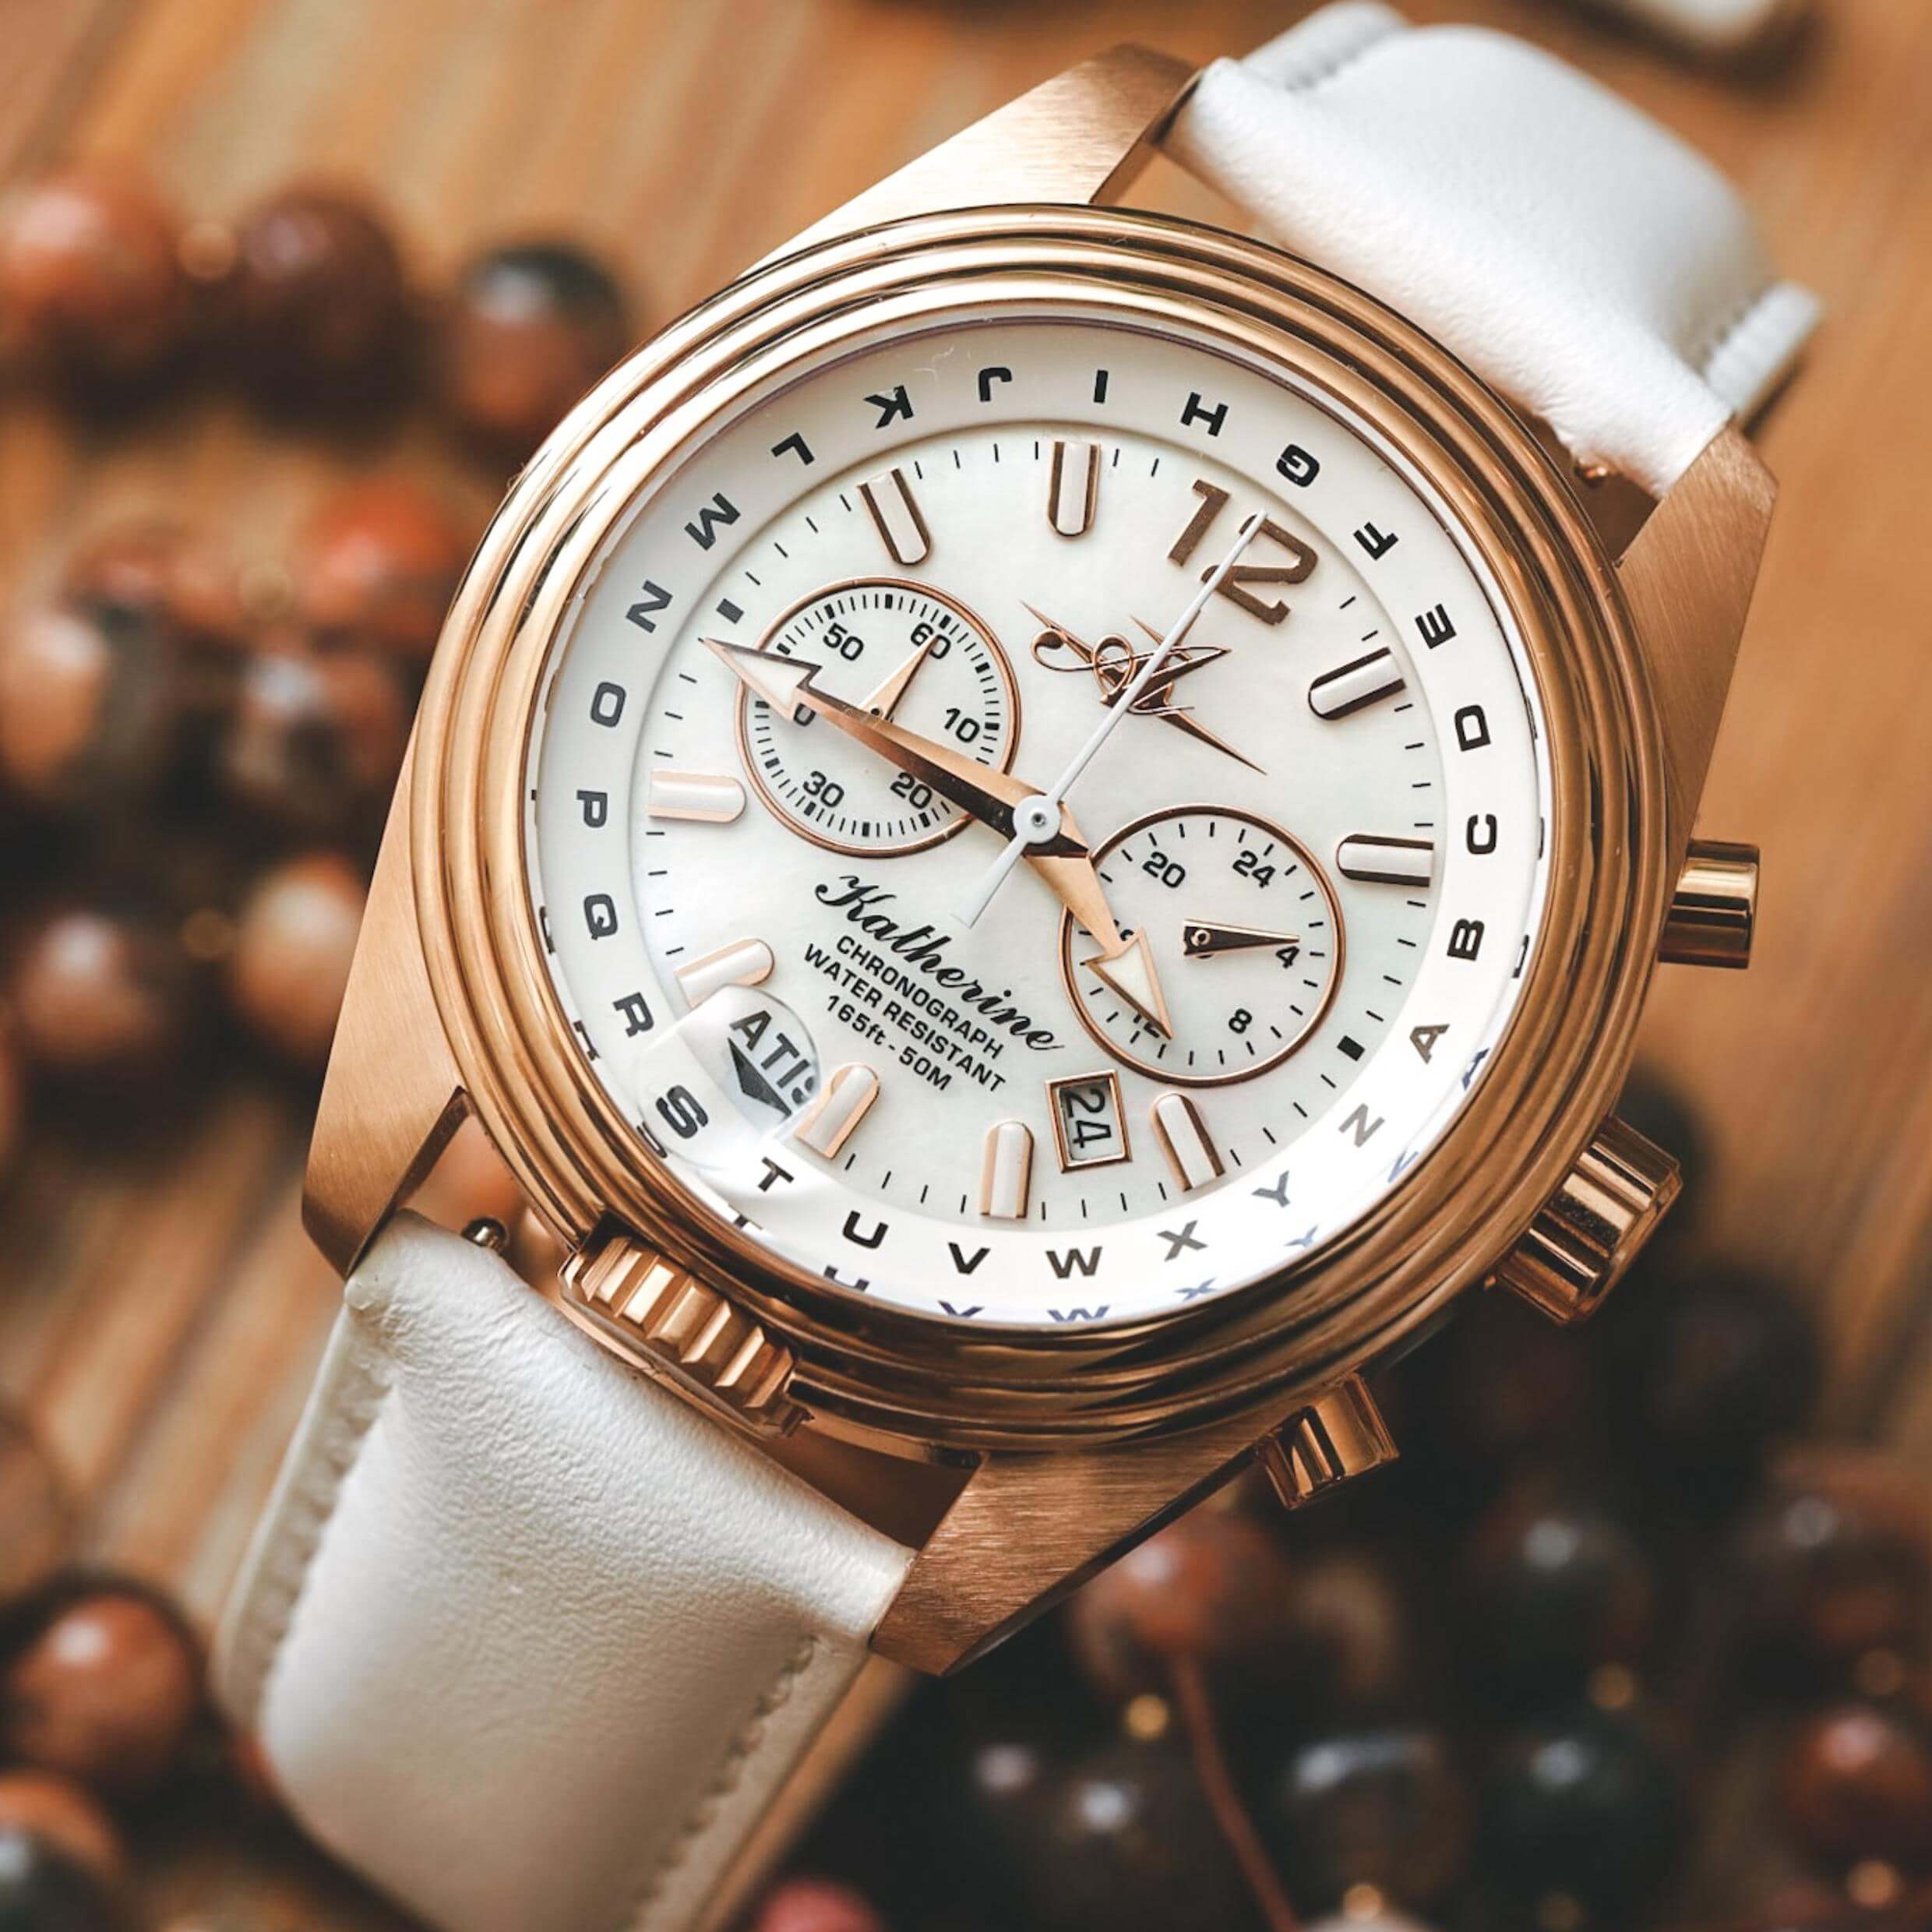 Abingdon Co. Image displays Katherine watch with rose gold case and white leather band in front of a background with beads and wood. White pearl dial with stopwatch, date display, and military time. Pilot aviation watch for women by Abingdon Company